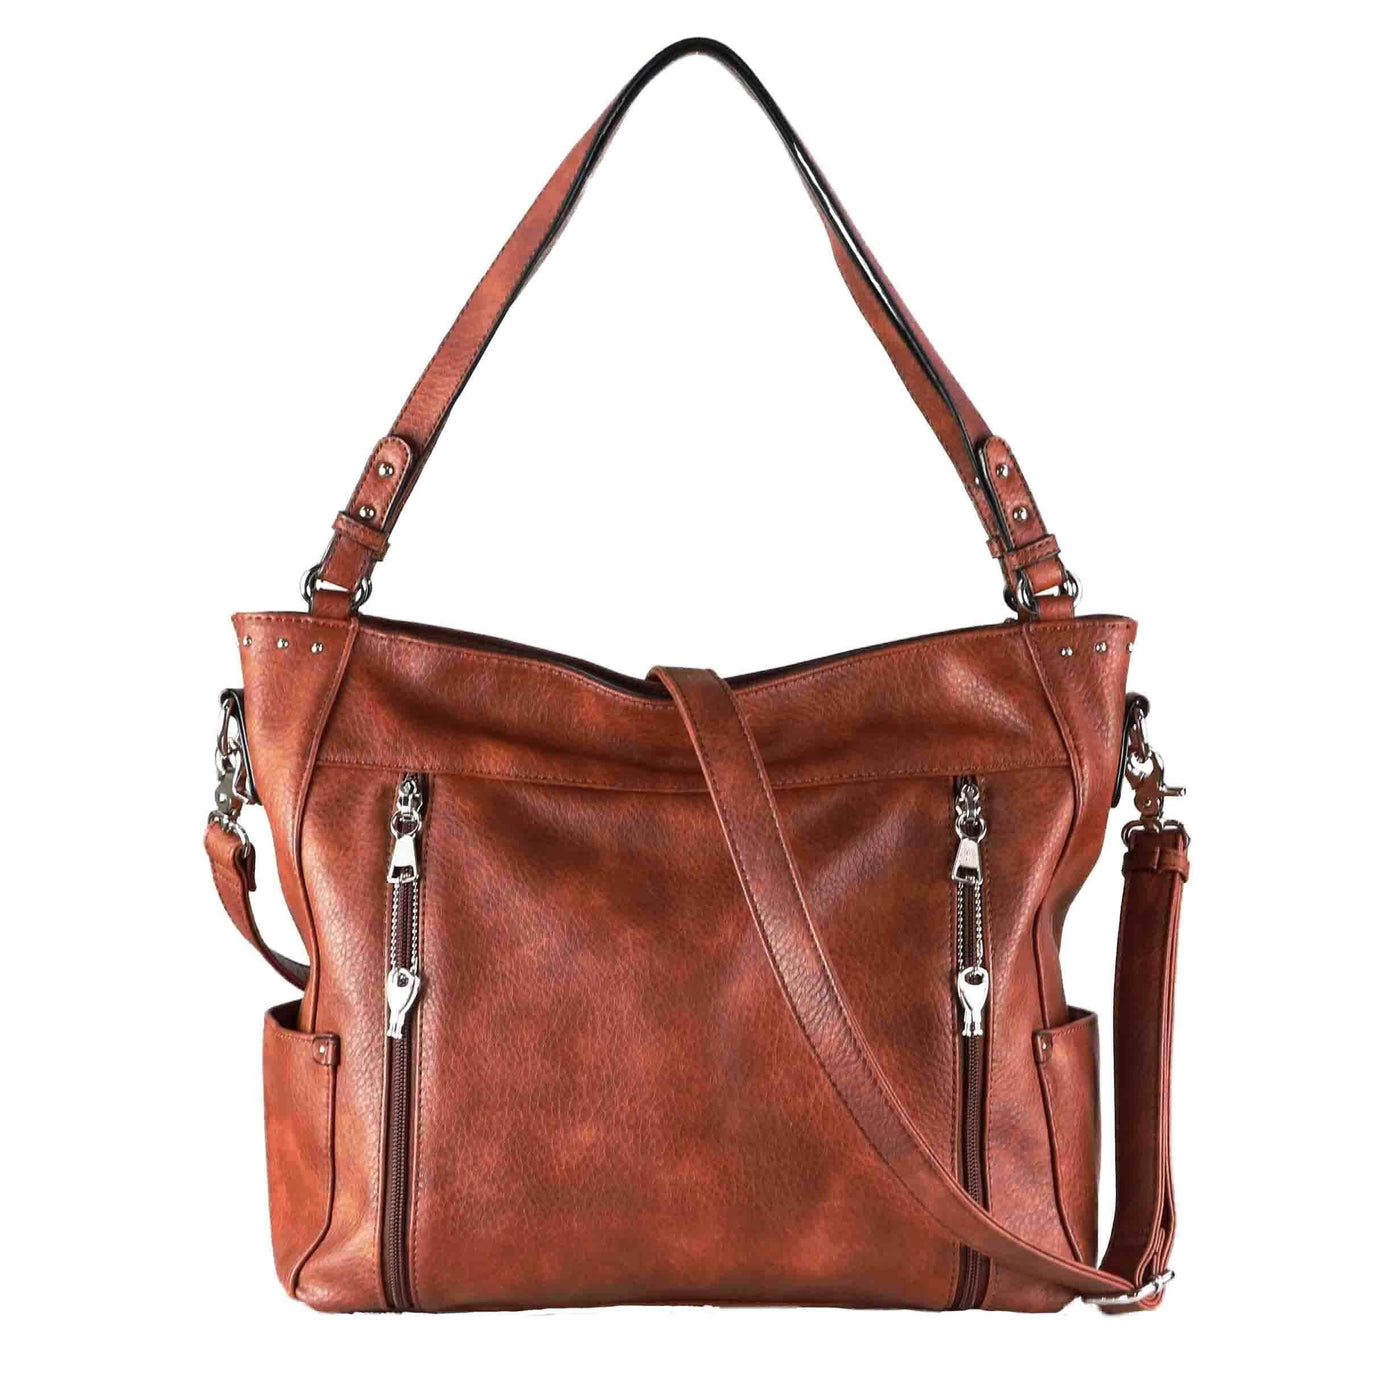 Lady Conceal Concealed Carry Purse Mahogany Concealed Carry Brooklyn Tote Bag by Lady Conceal